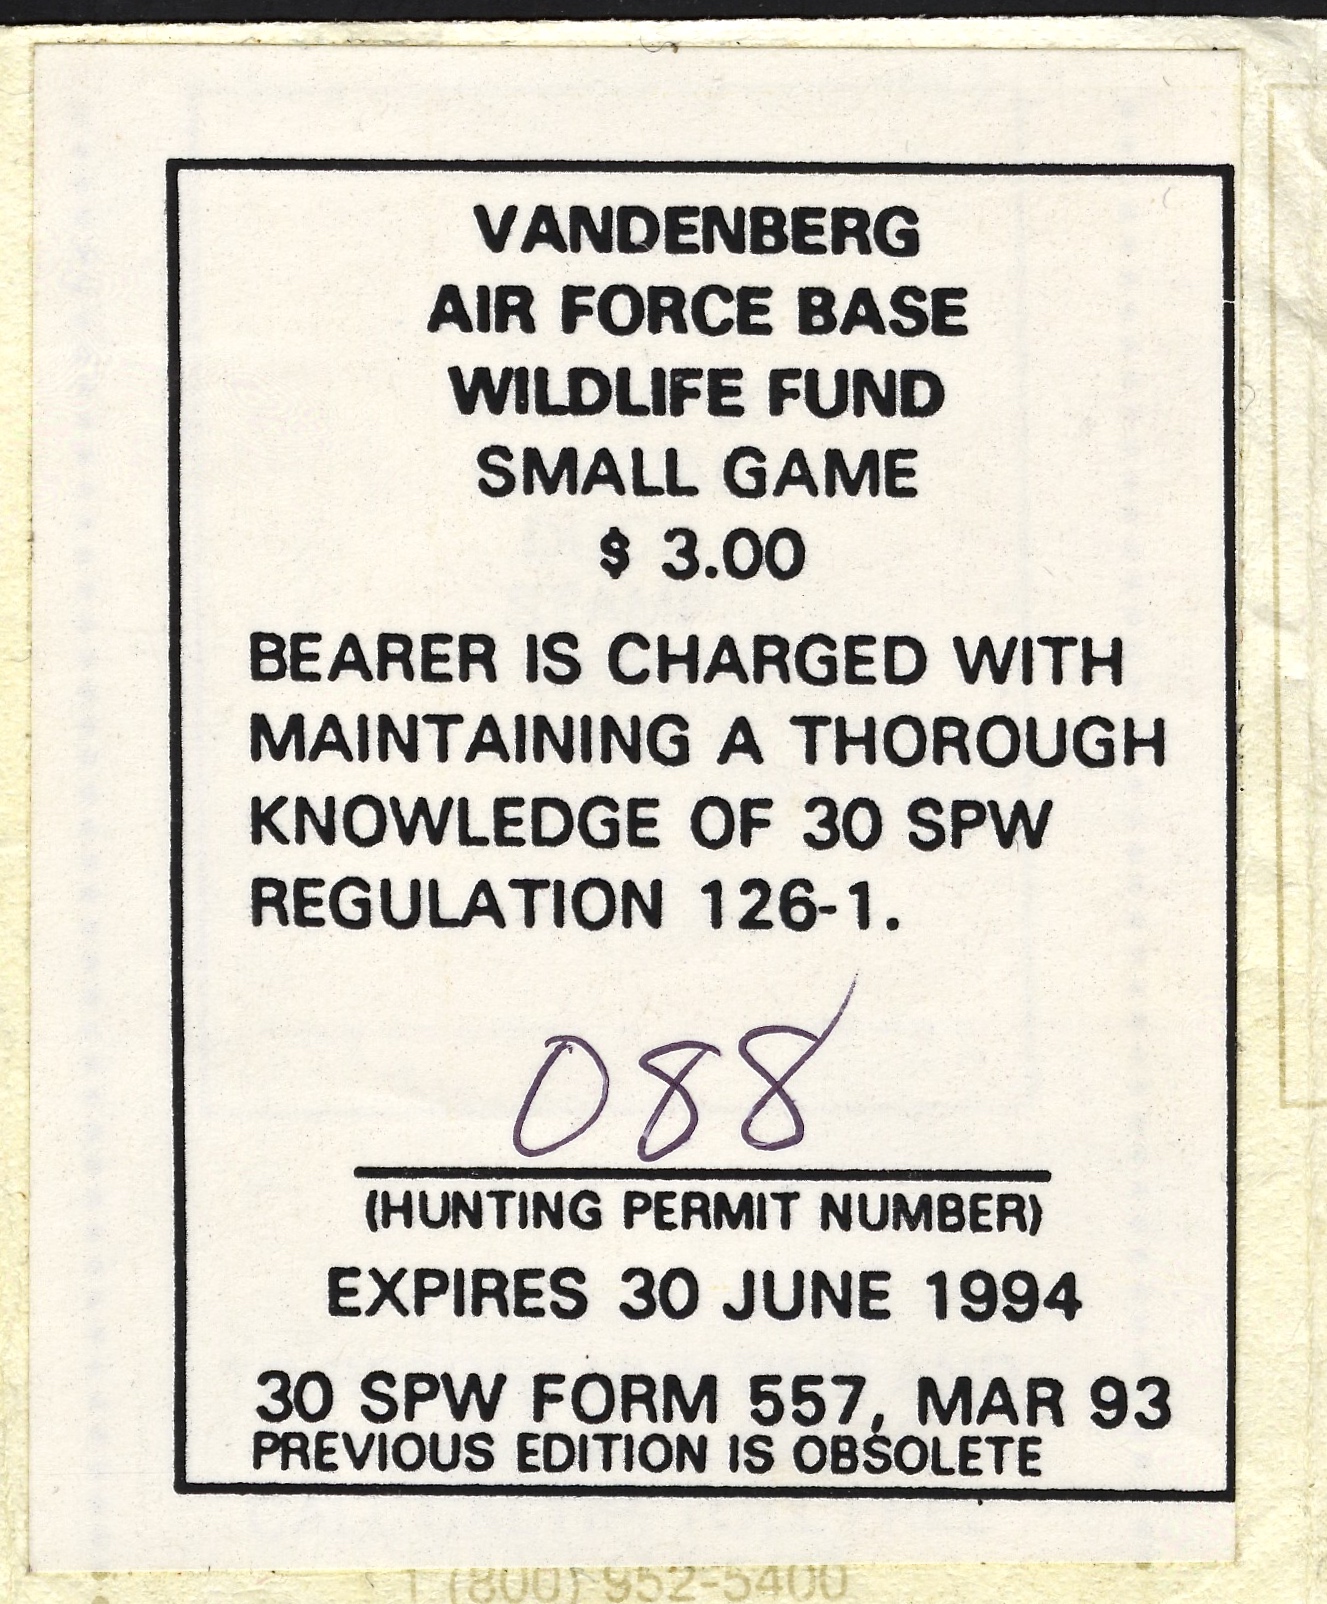 1993-94 VAFB Small Game